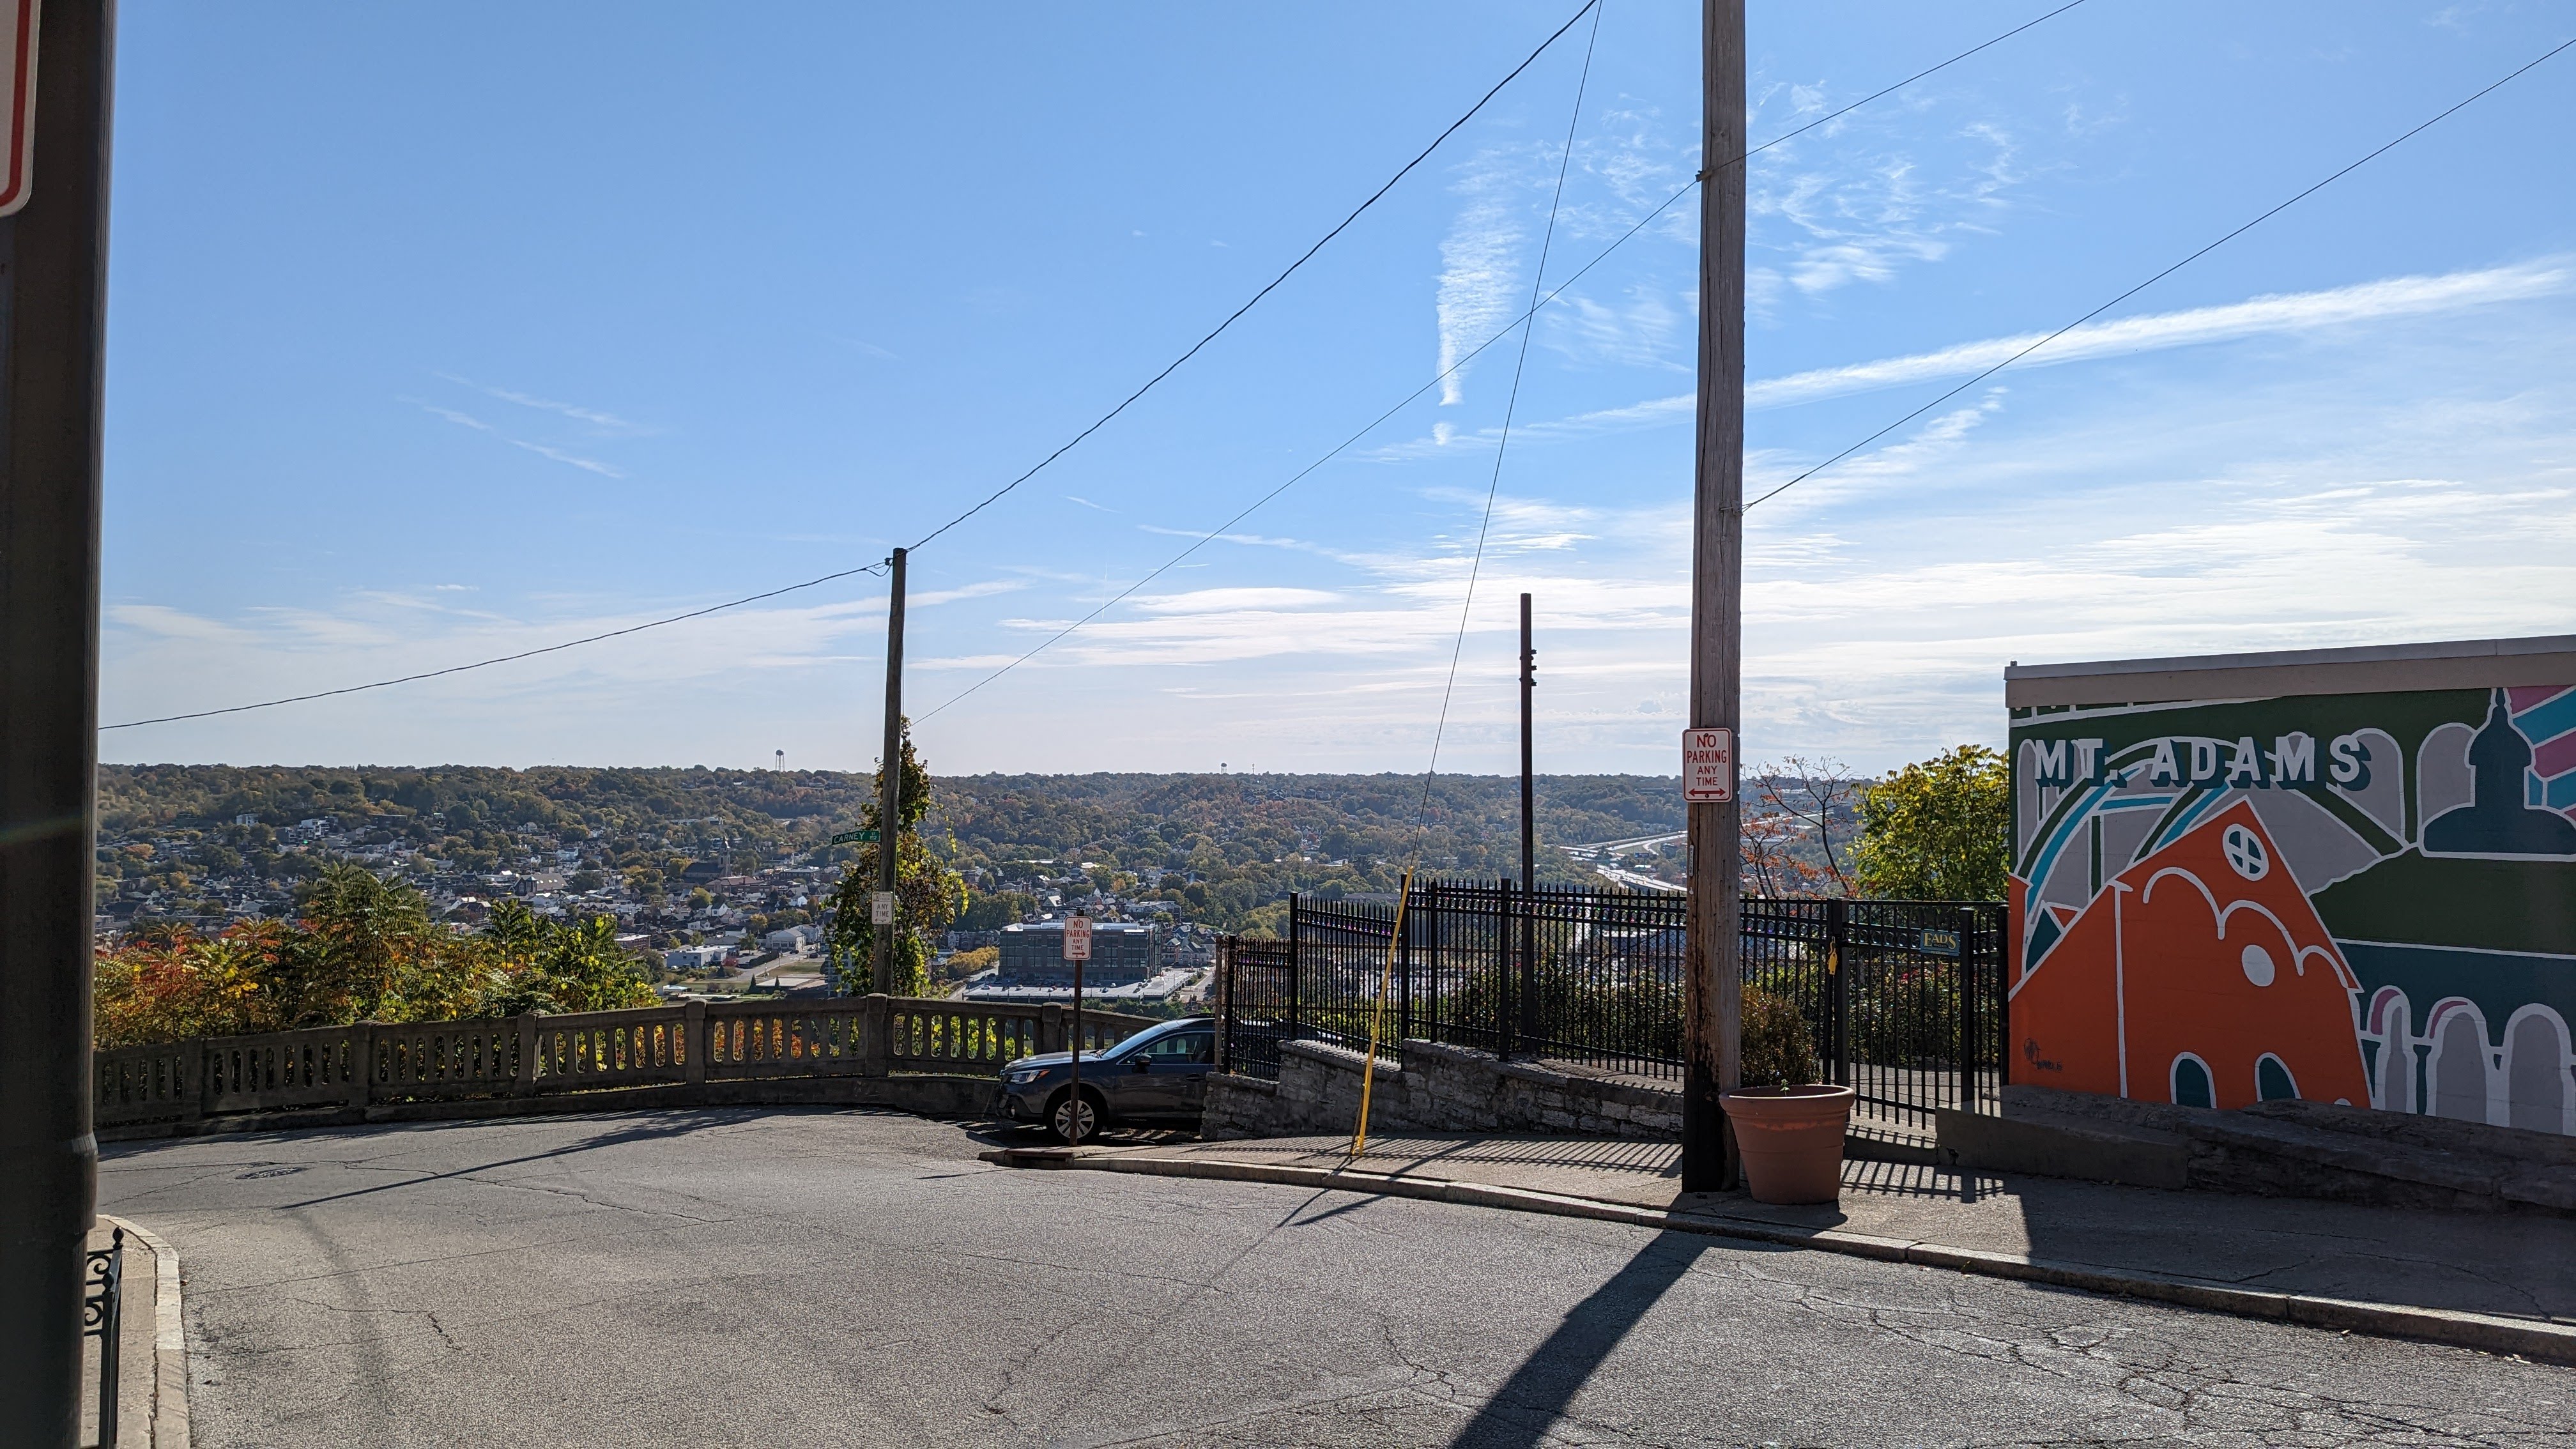 Photo of neighborhood in the distance, Mount Adams mural on right